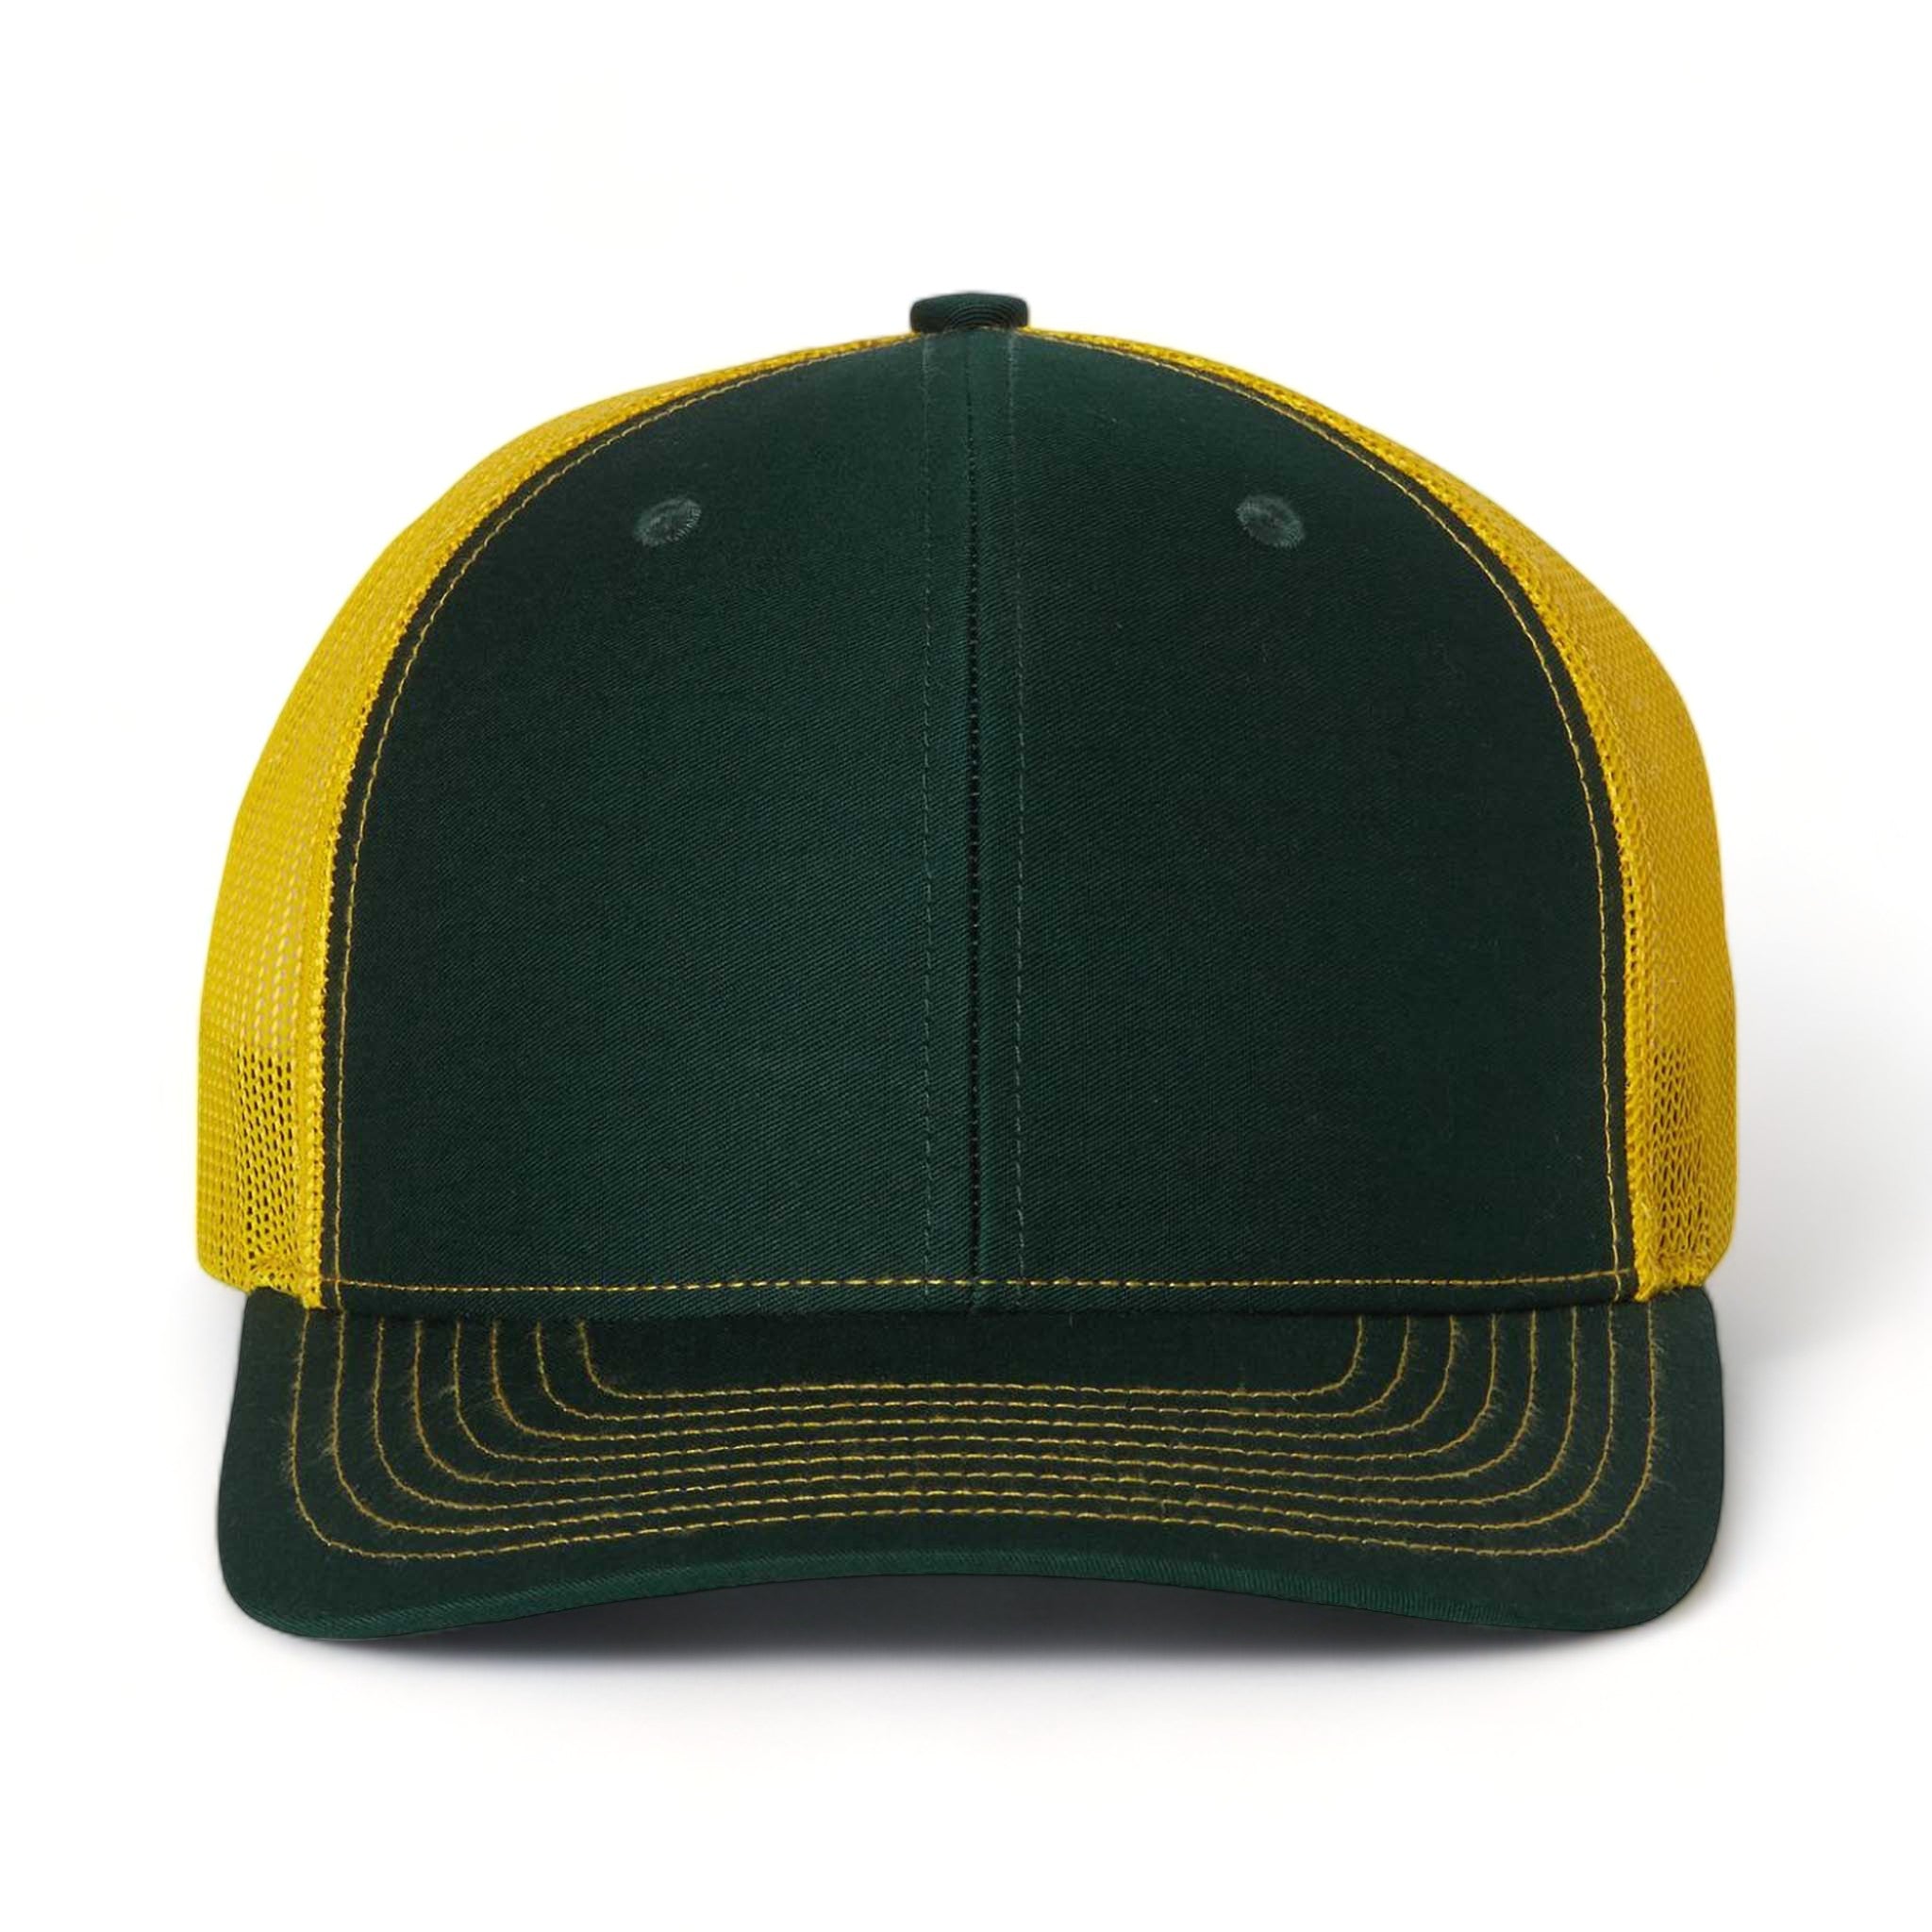 Front view of Richardson 112 custom hat in dark green and yellow